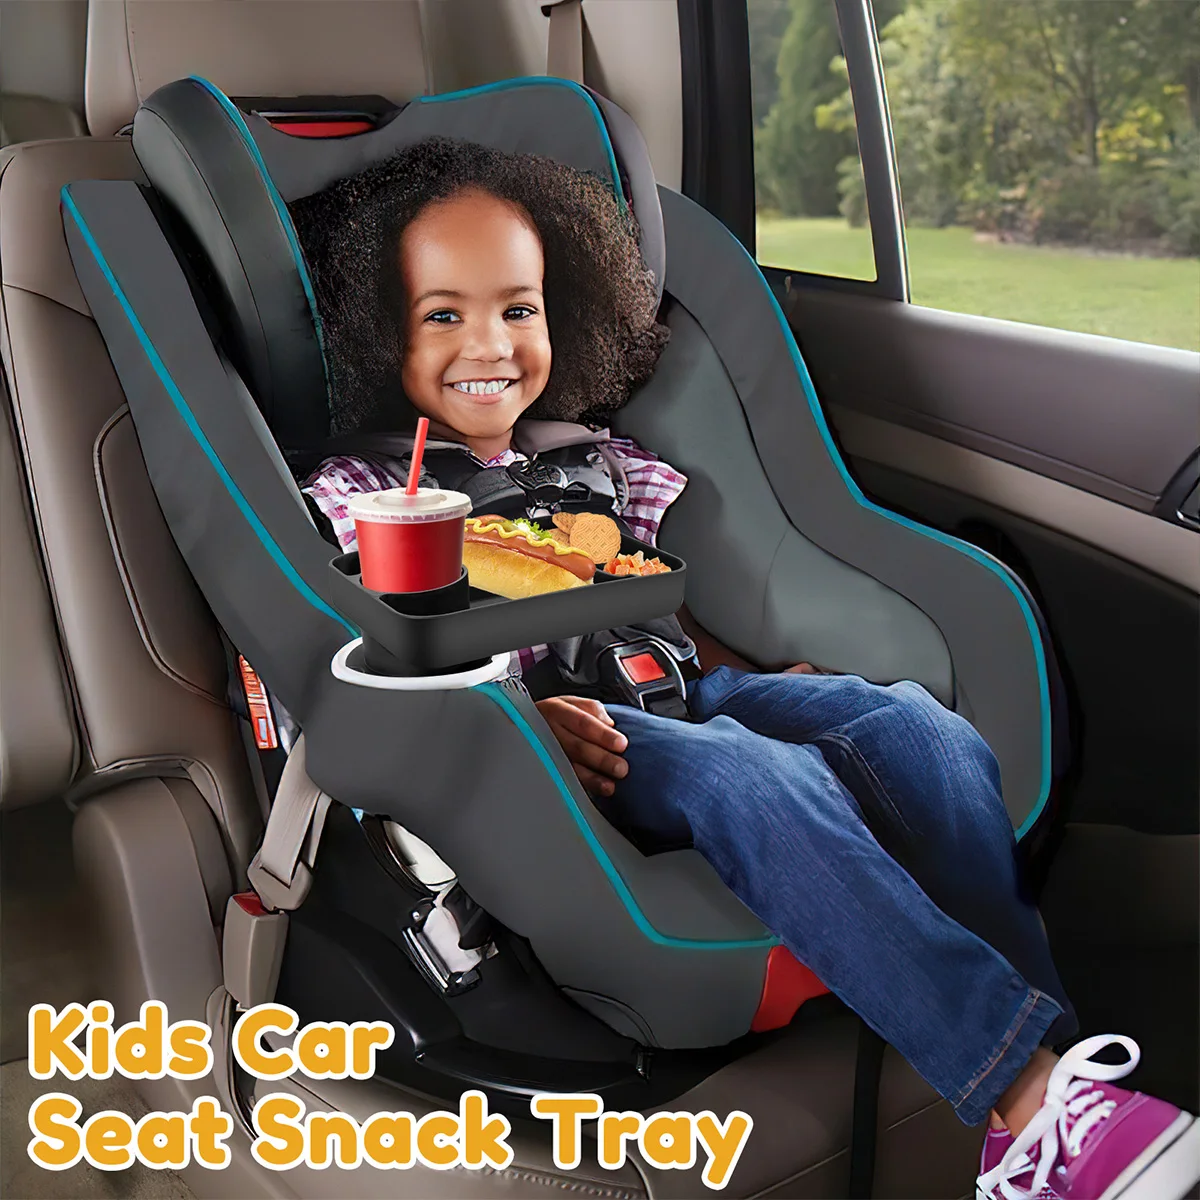 Car Seat Snack Tray with Cup Holder Silicone Kids Car Seat Travel Tray Portable Kids Car Seat Food Tray Holder Snack Tray